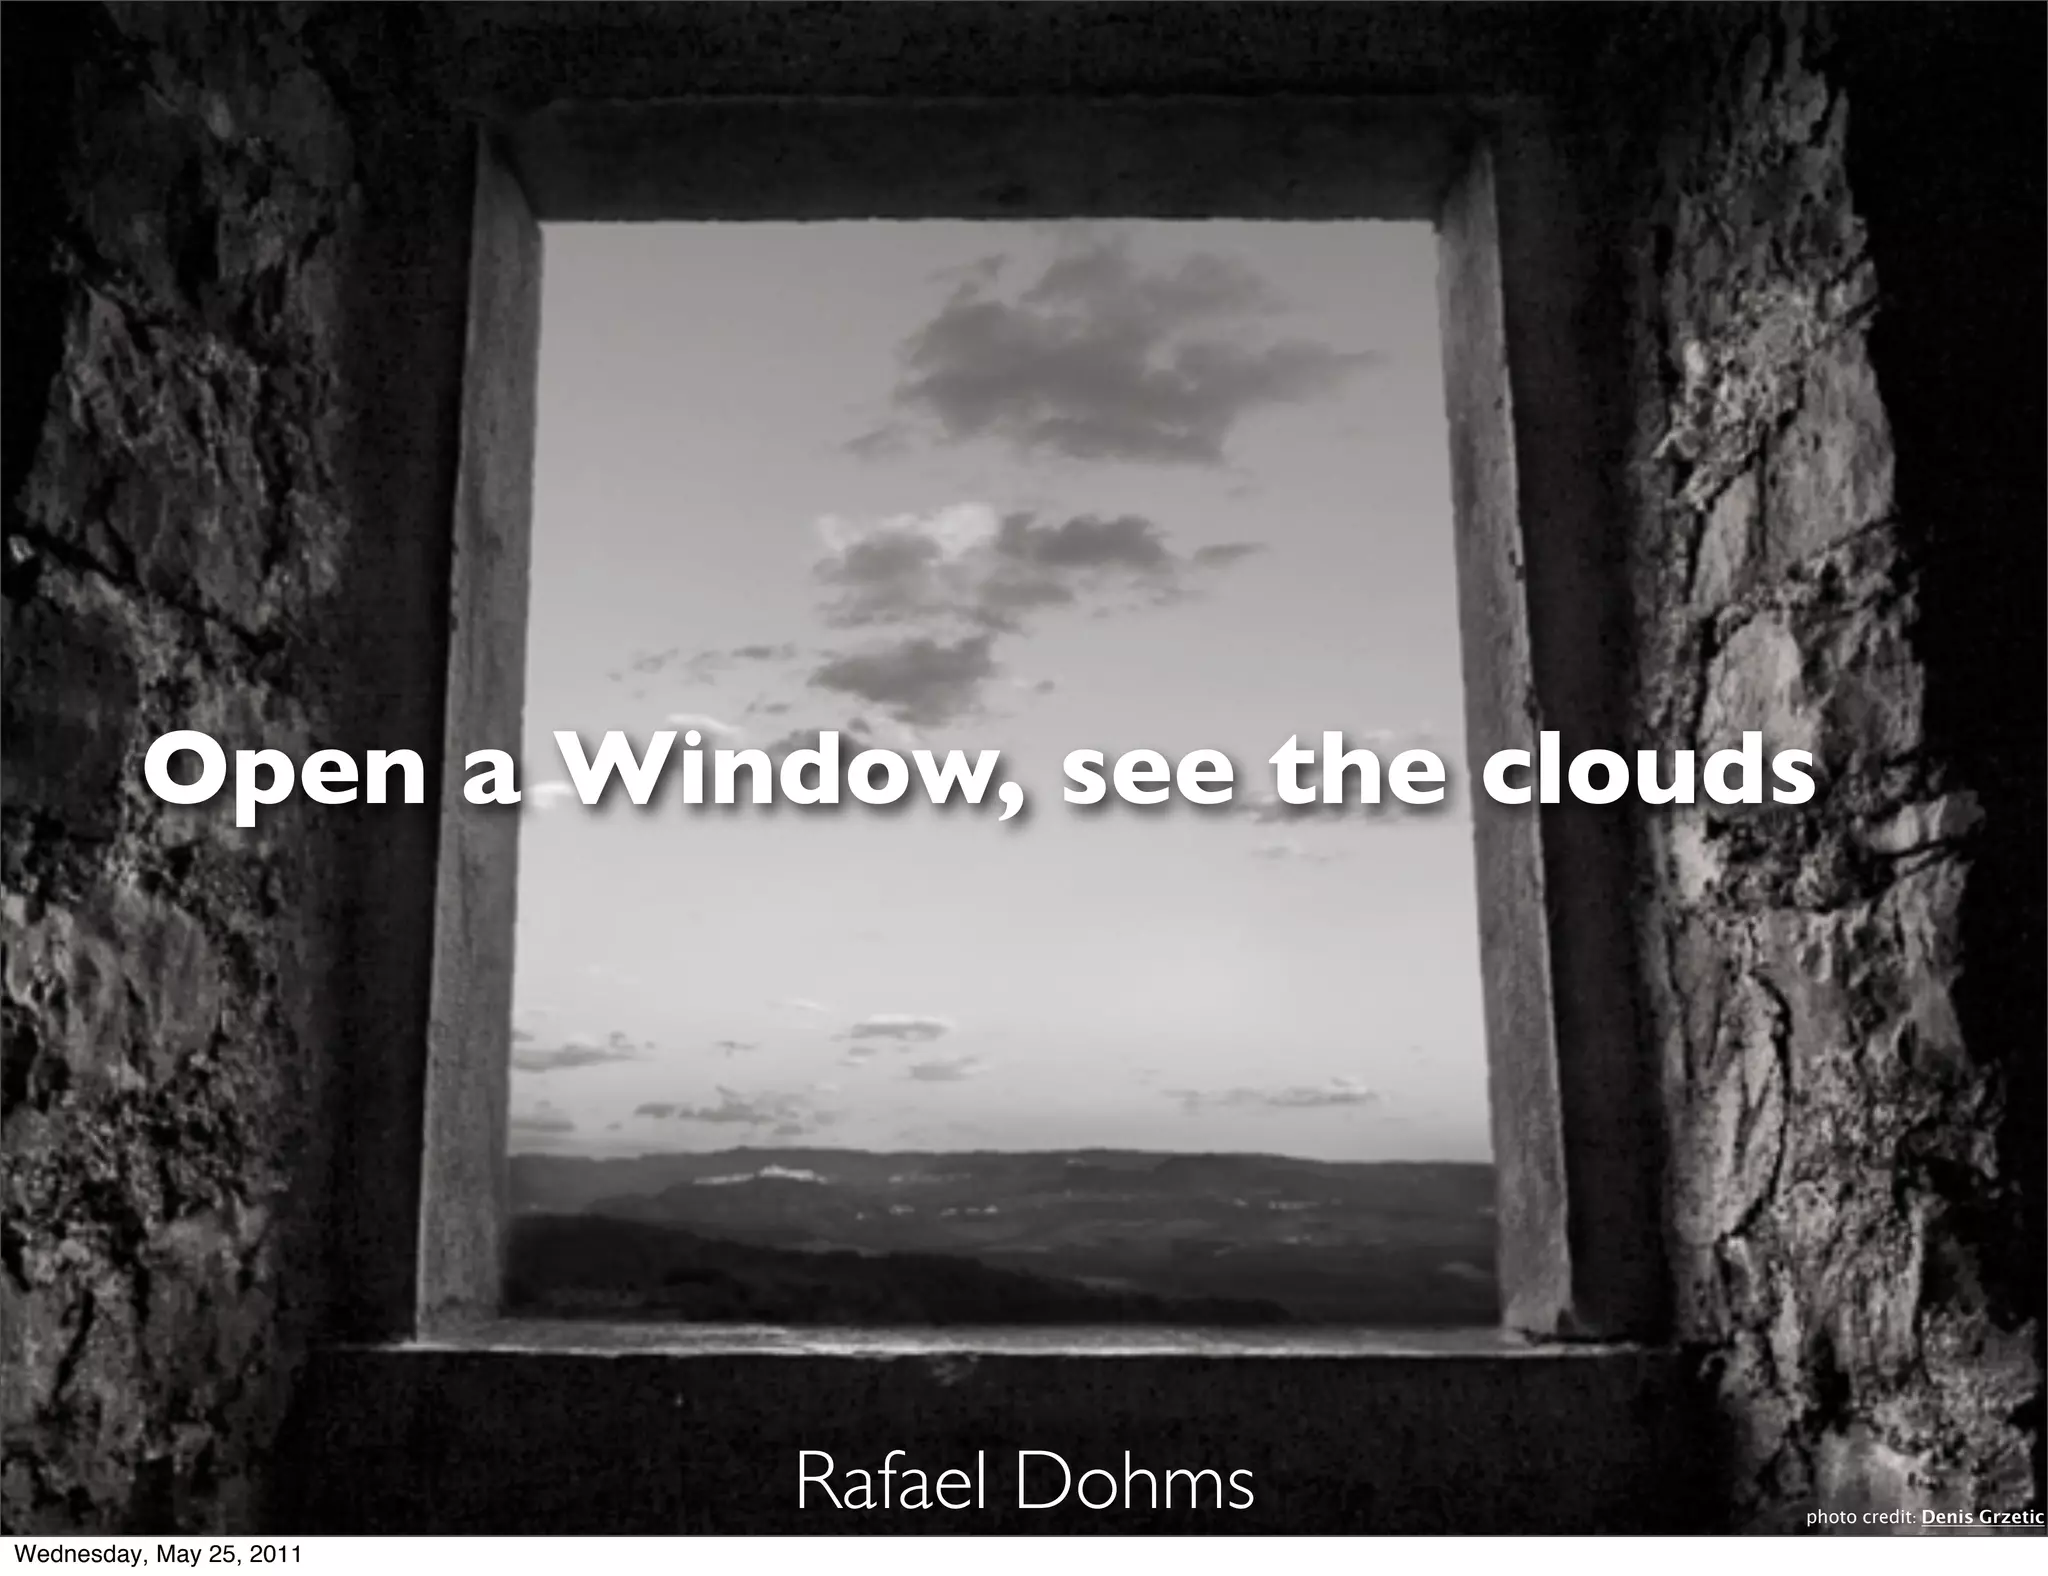 Open a window, see the clouds